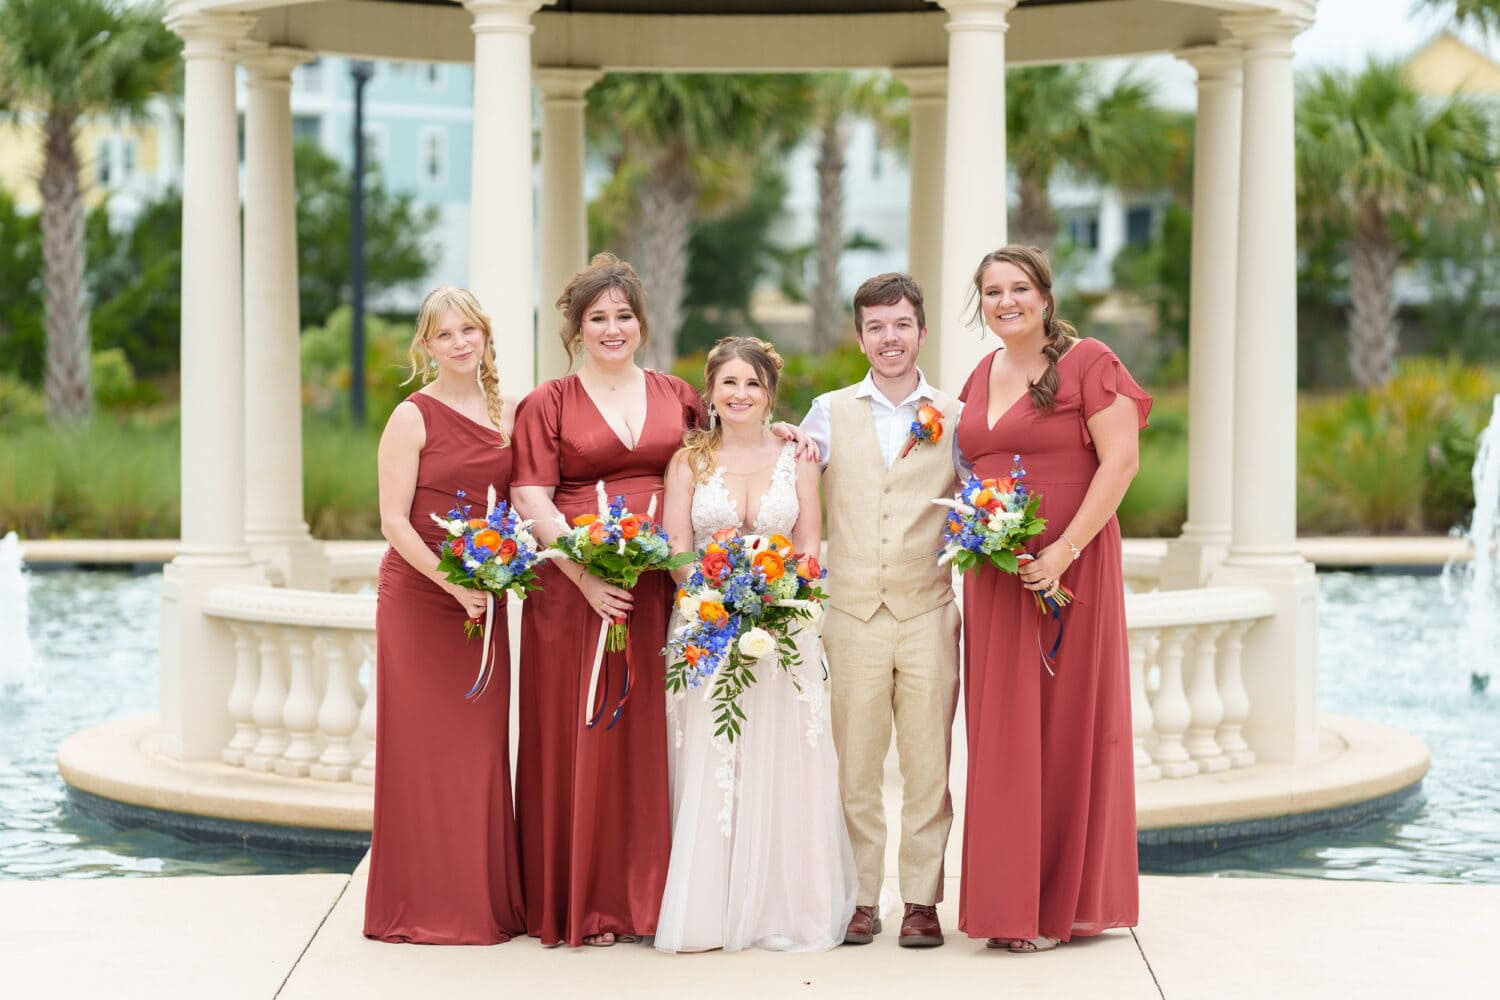 Bride with her bridesmaids - 21 Main Events - North Myrtle Beach